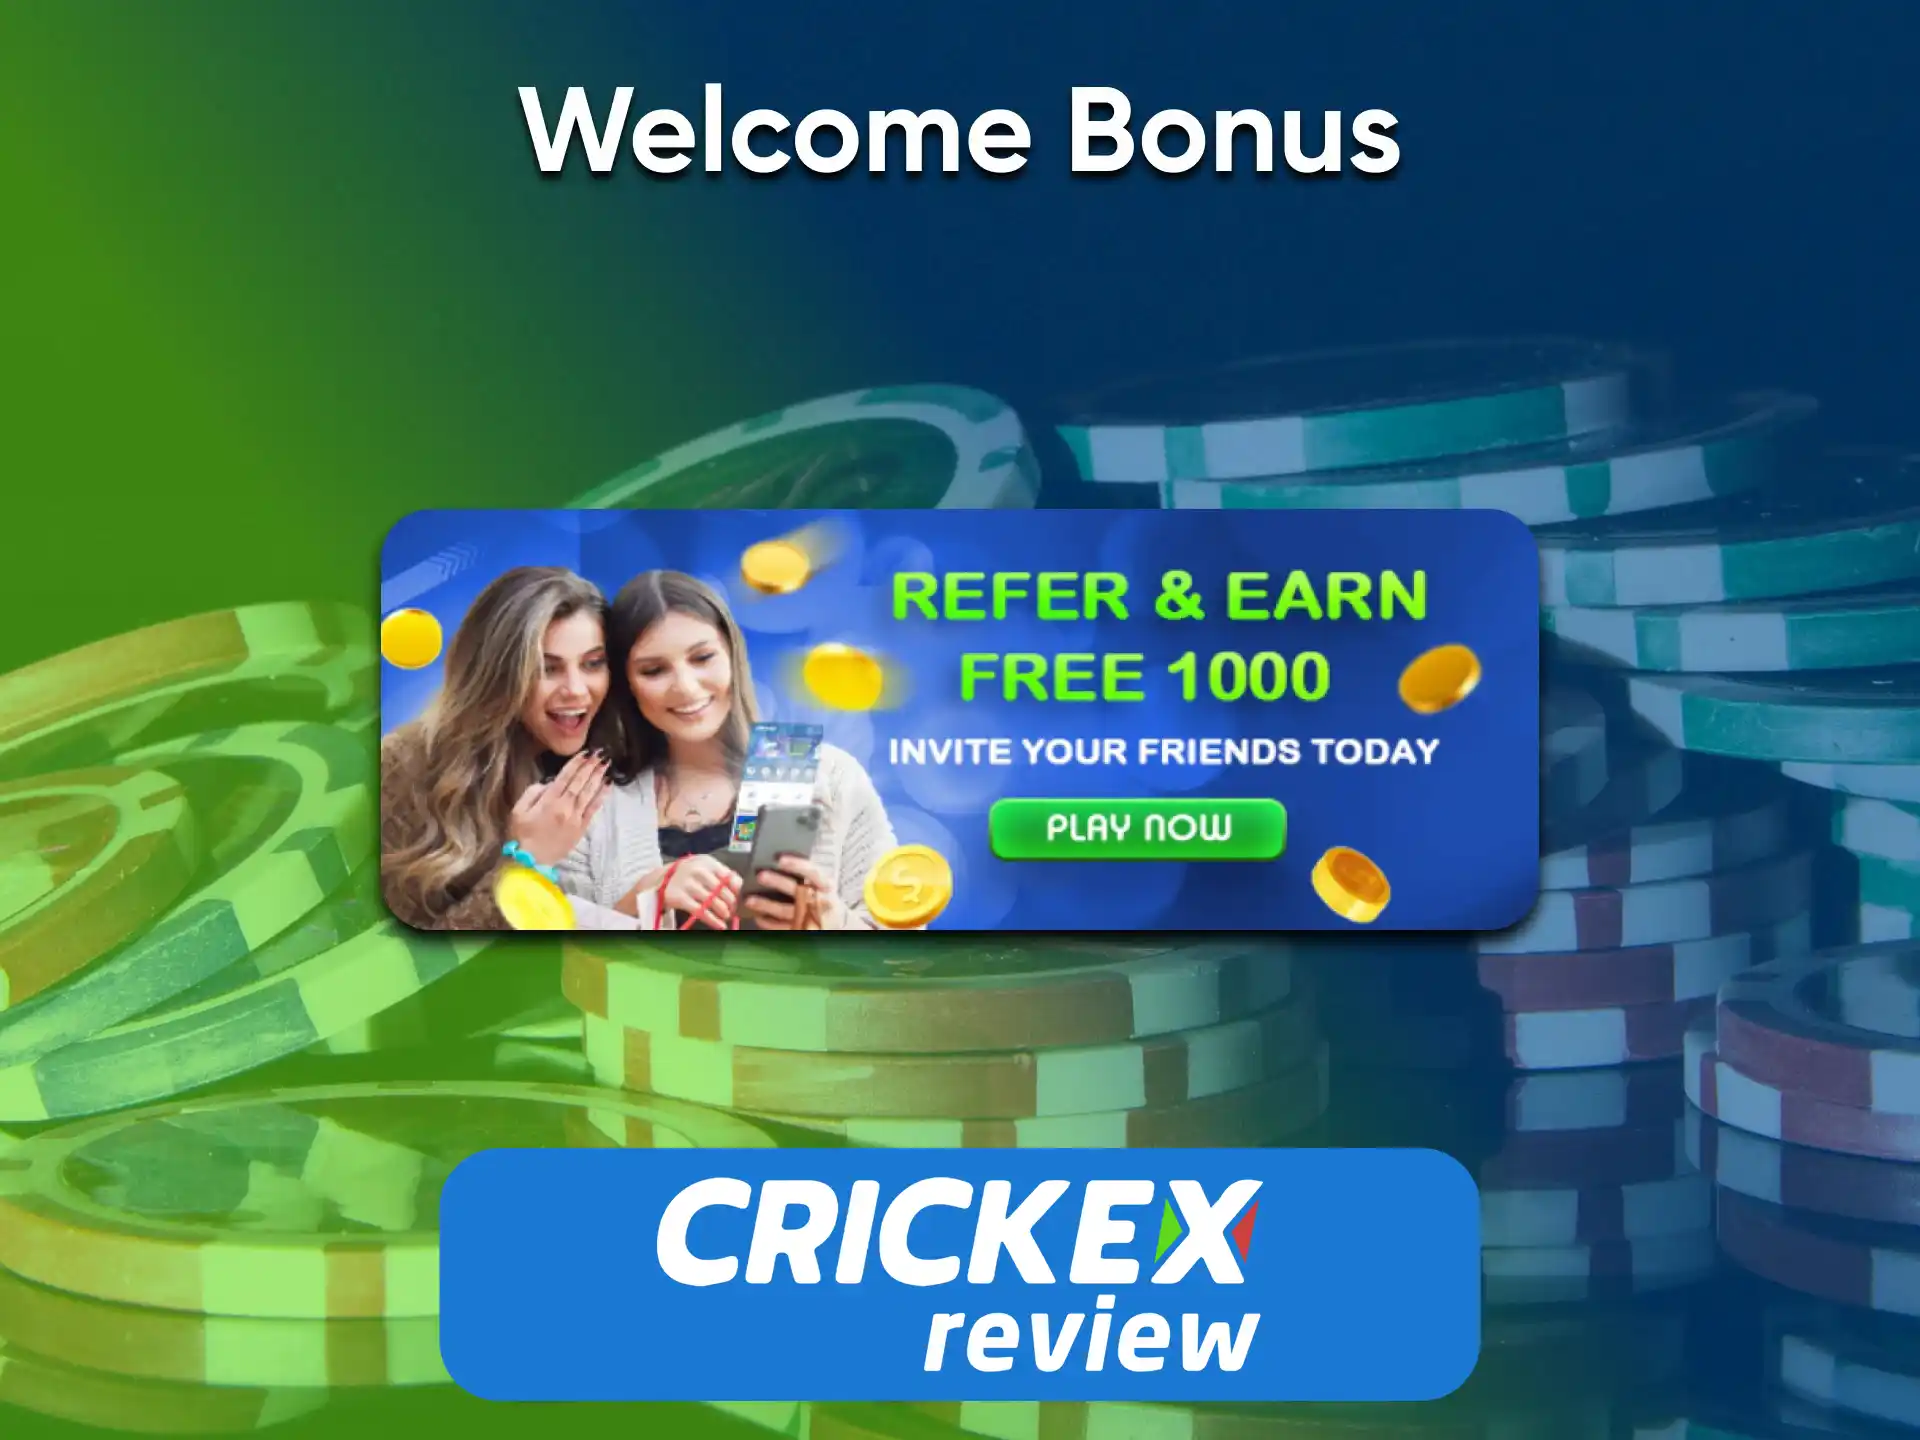 By replenishing your account and playing at Crickex casino you get bonuses.